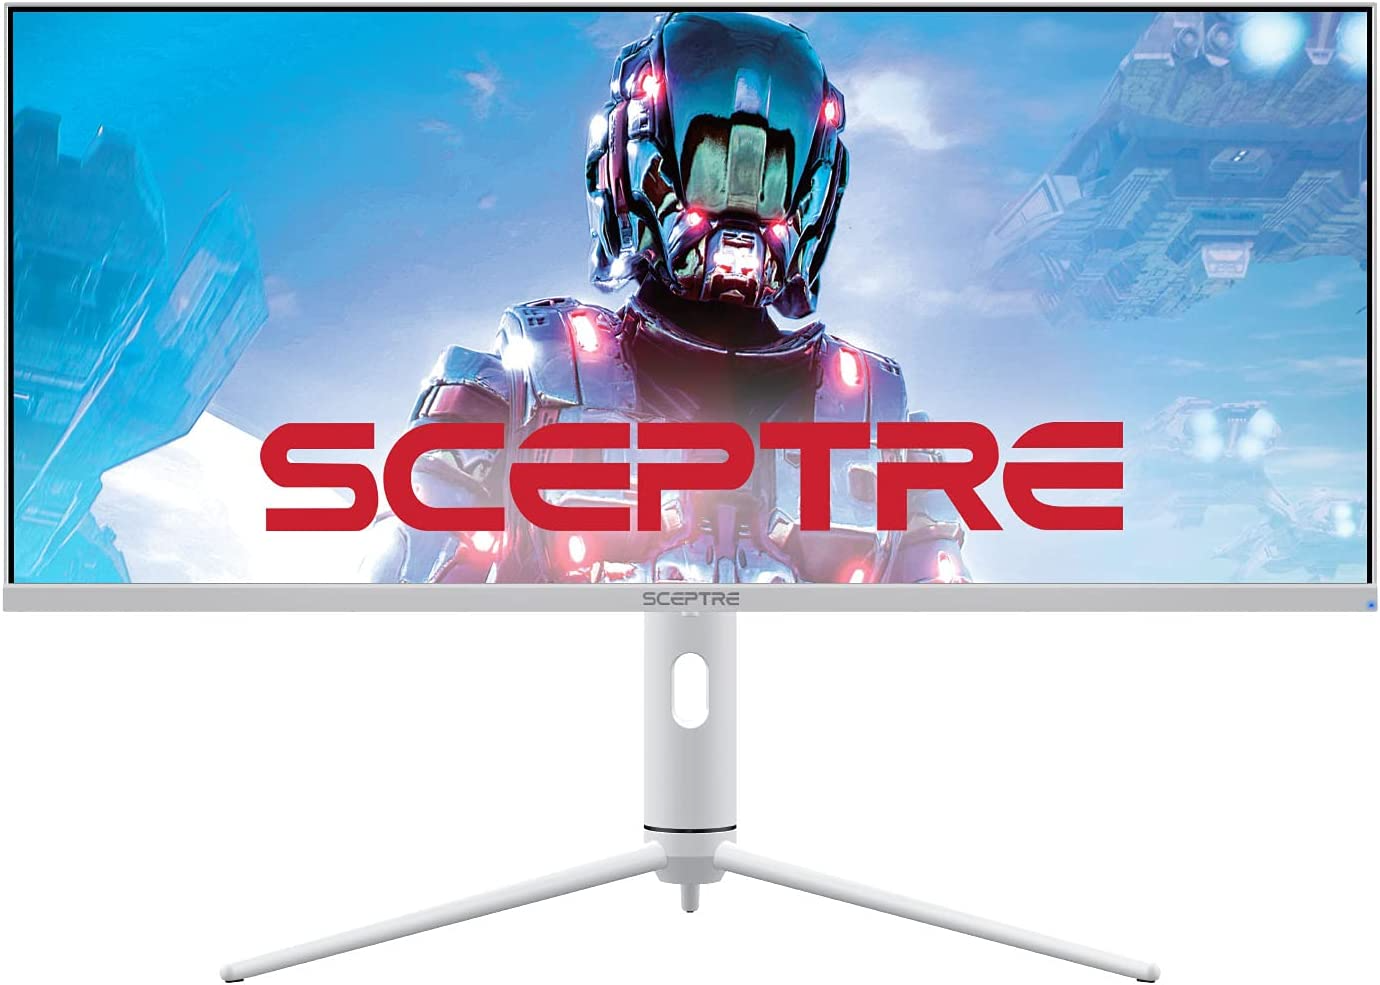 Sceptre IPS 34" White UltraWide Monitor 3440 x 1440p HDR400 1ms up to 144Hz 95% 